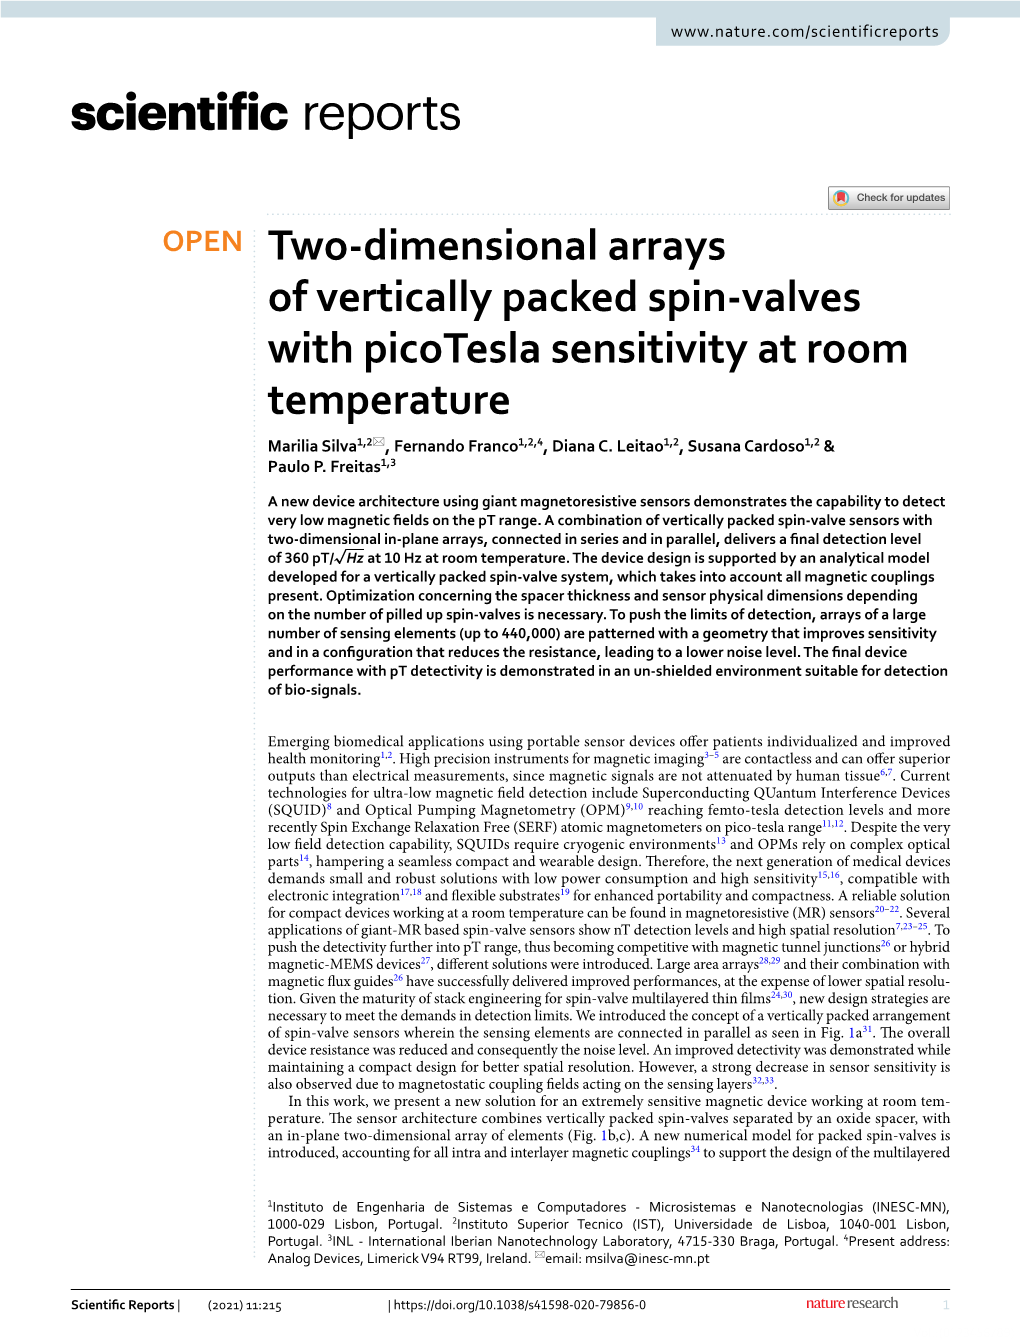 Two-Dimensional Arrays of Vertically Packed Spin-Valves With